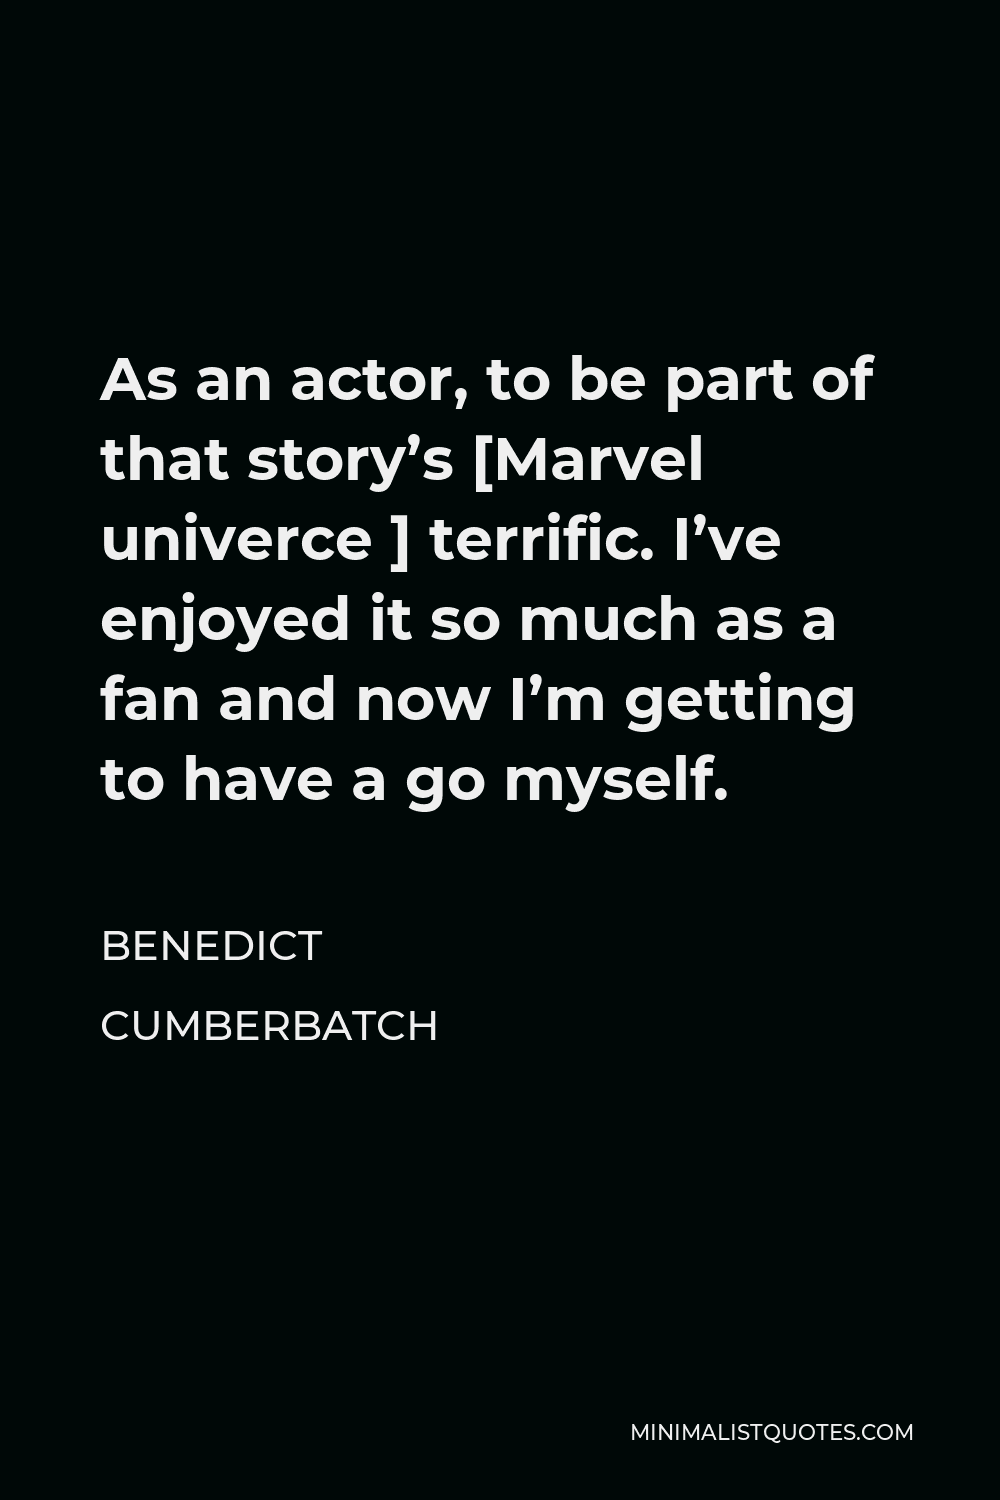 Benedict Cumberbatch Quote - As an actor, to be part of that story’s [Marvel univerce ] terrific. I’ve enjoyed it so much as a fan and now I’m getting to have a go myself.